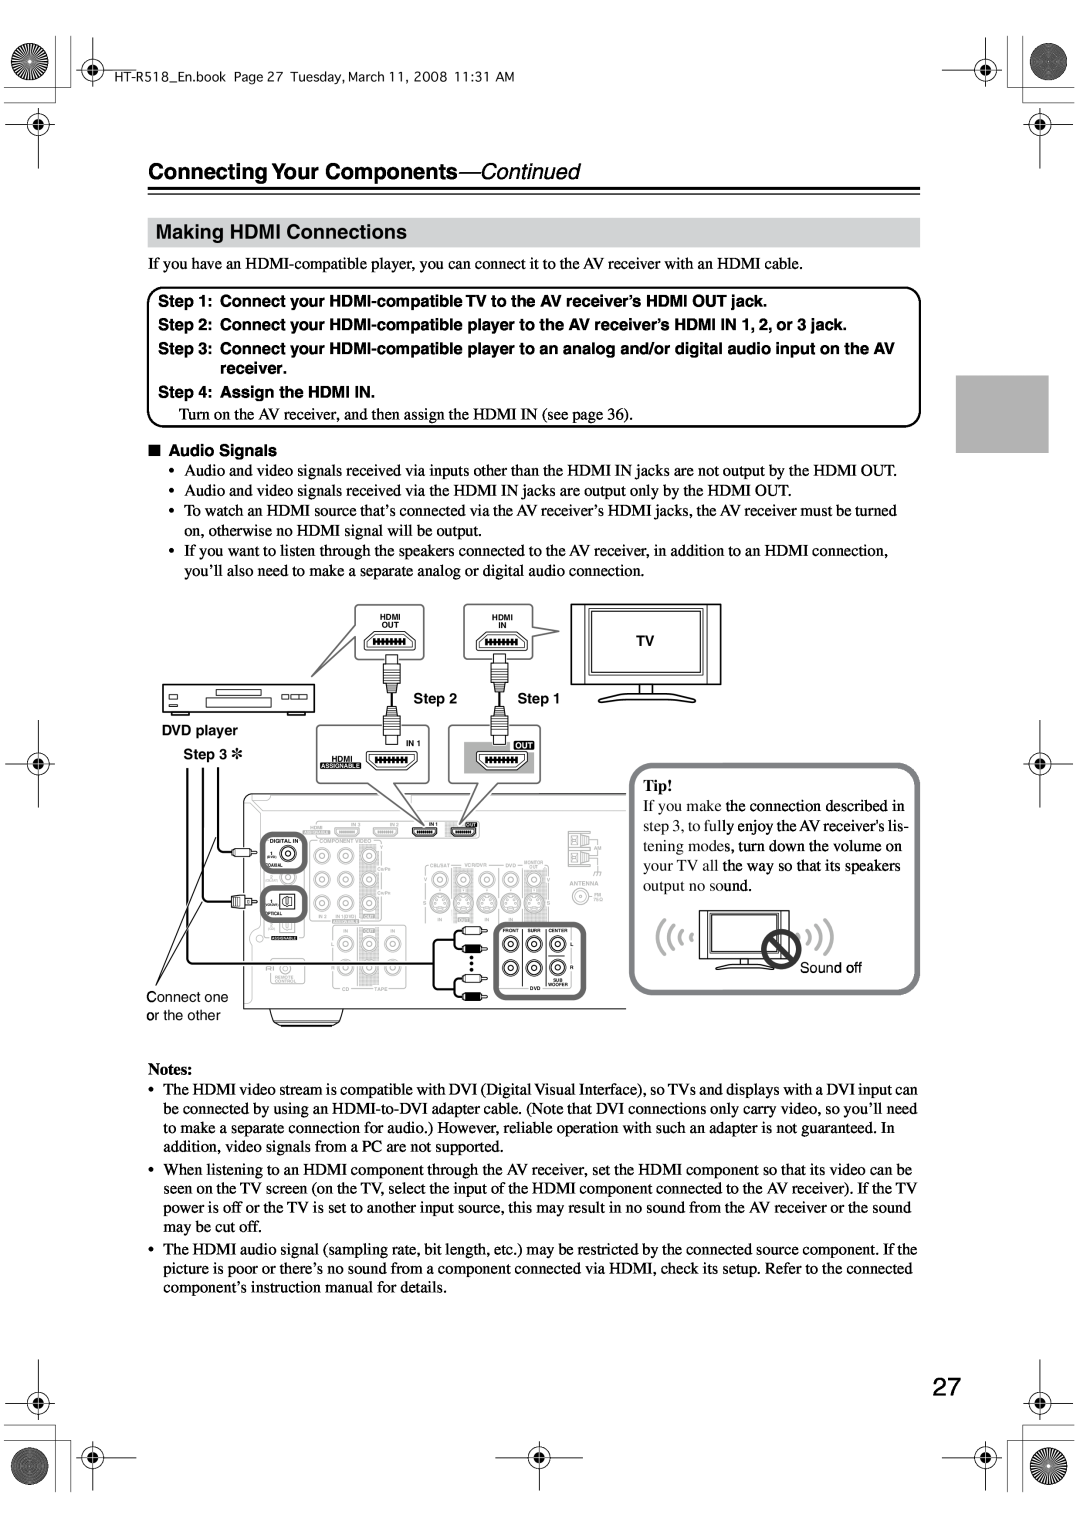 Onkyo HT-R518 instruction manual Making HDMI Connections, Connecting Your Components-Continued 